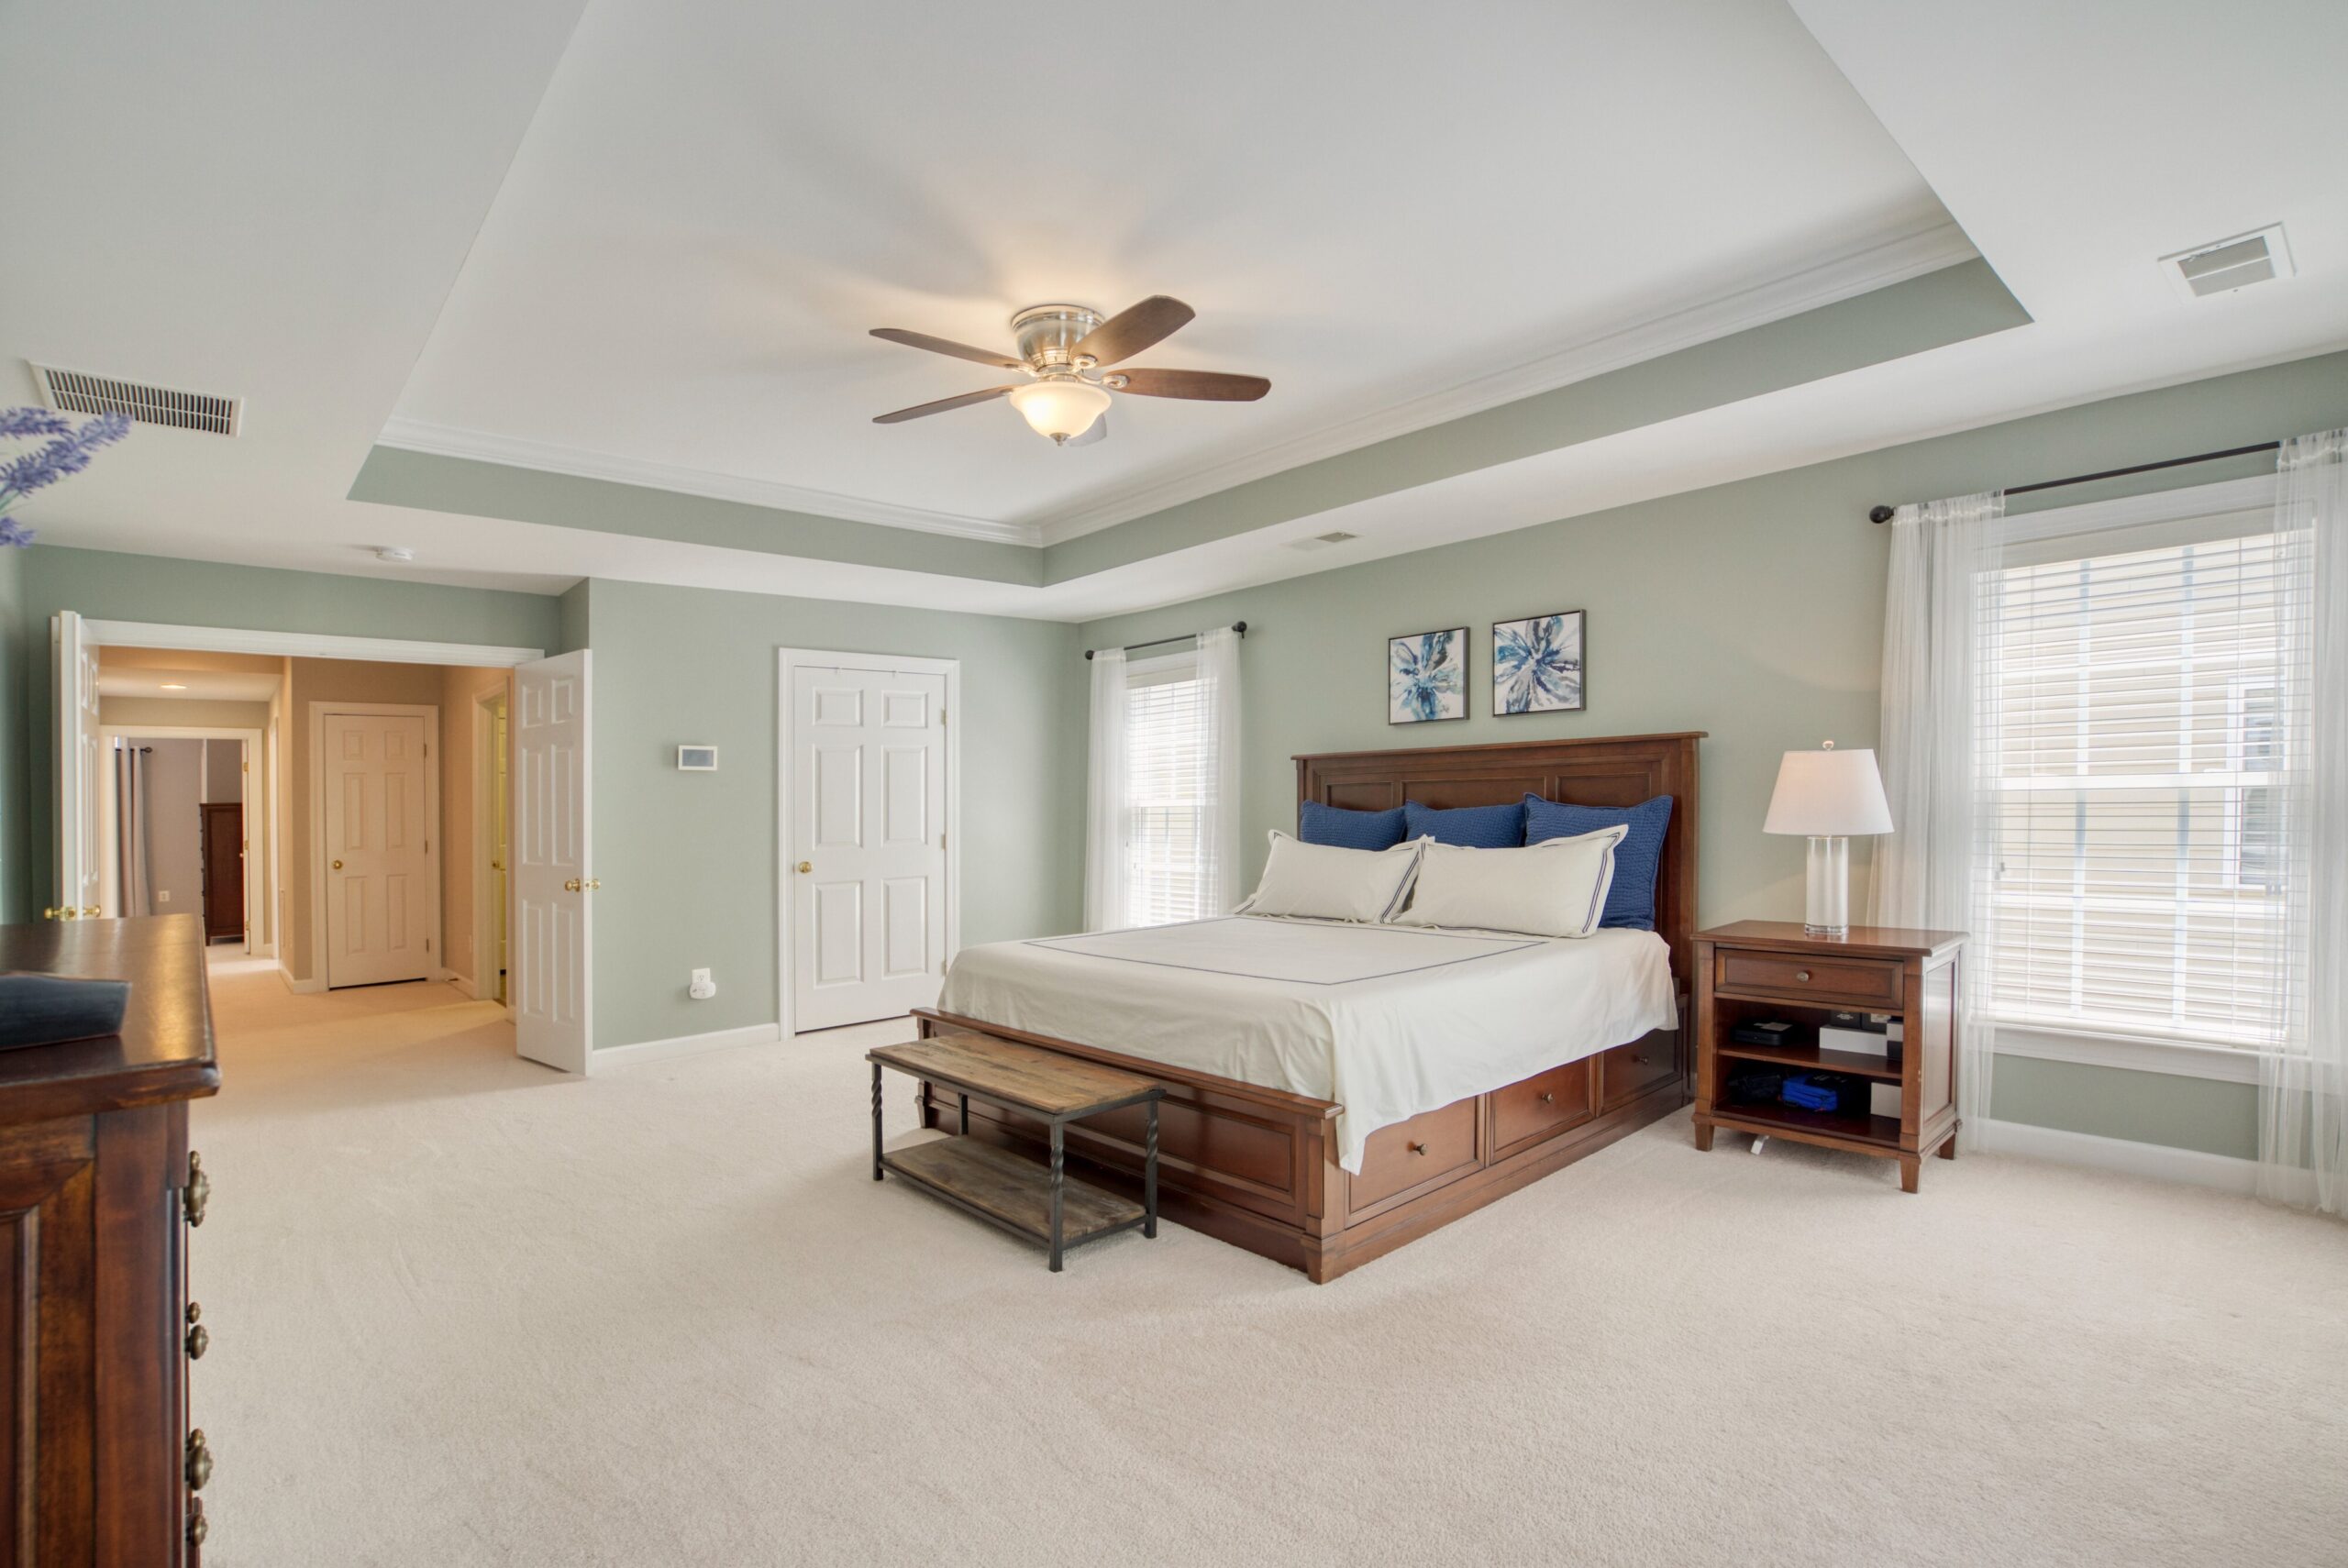 Large master bedroom with tray ceiling and lots of light from large windows